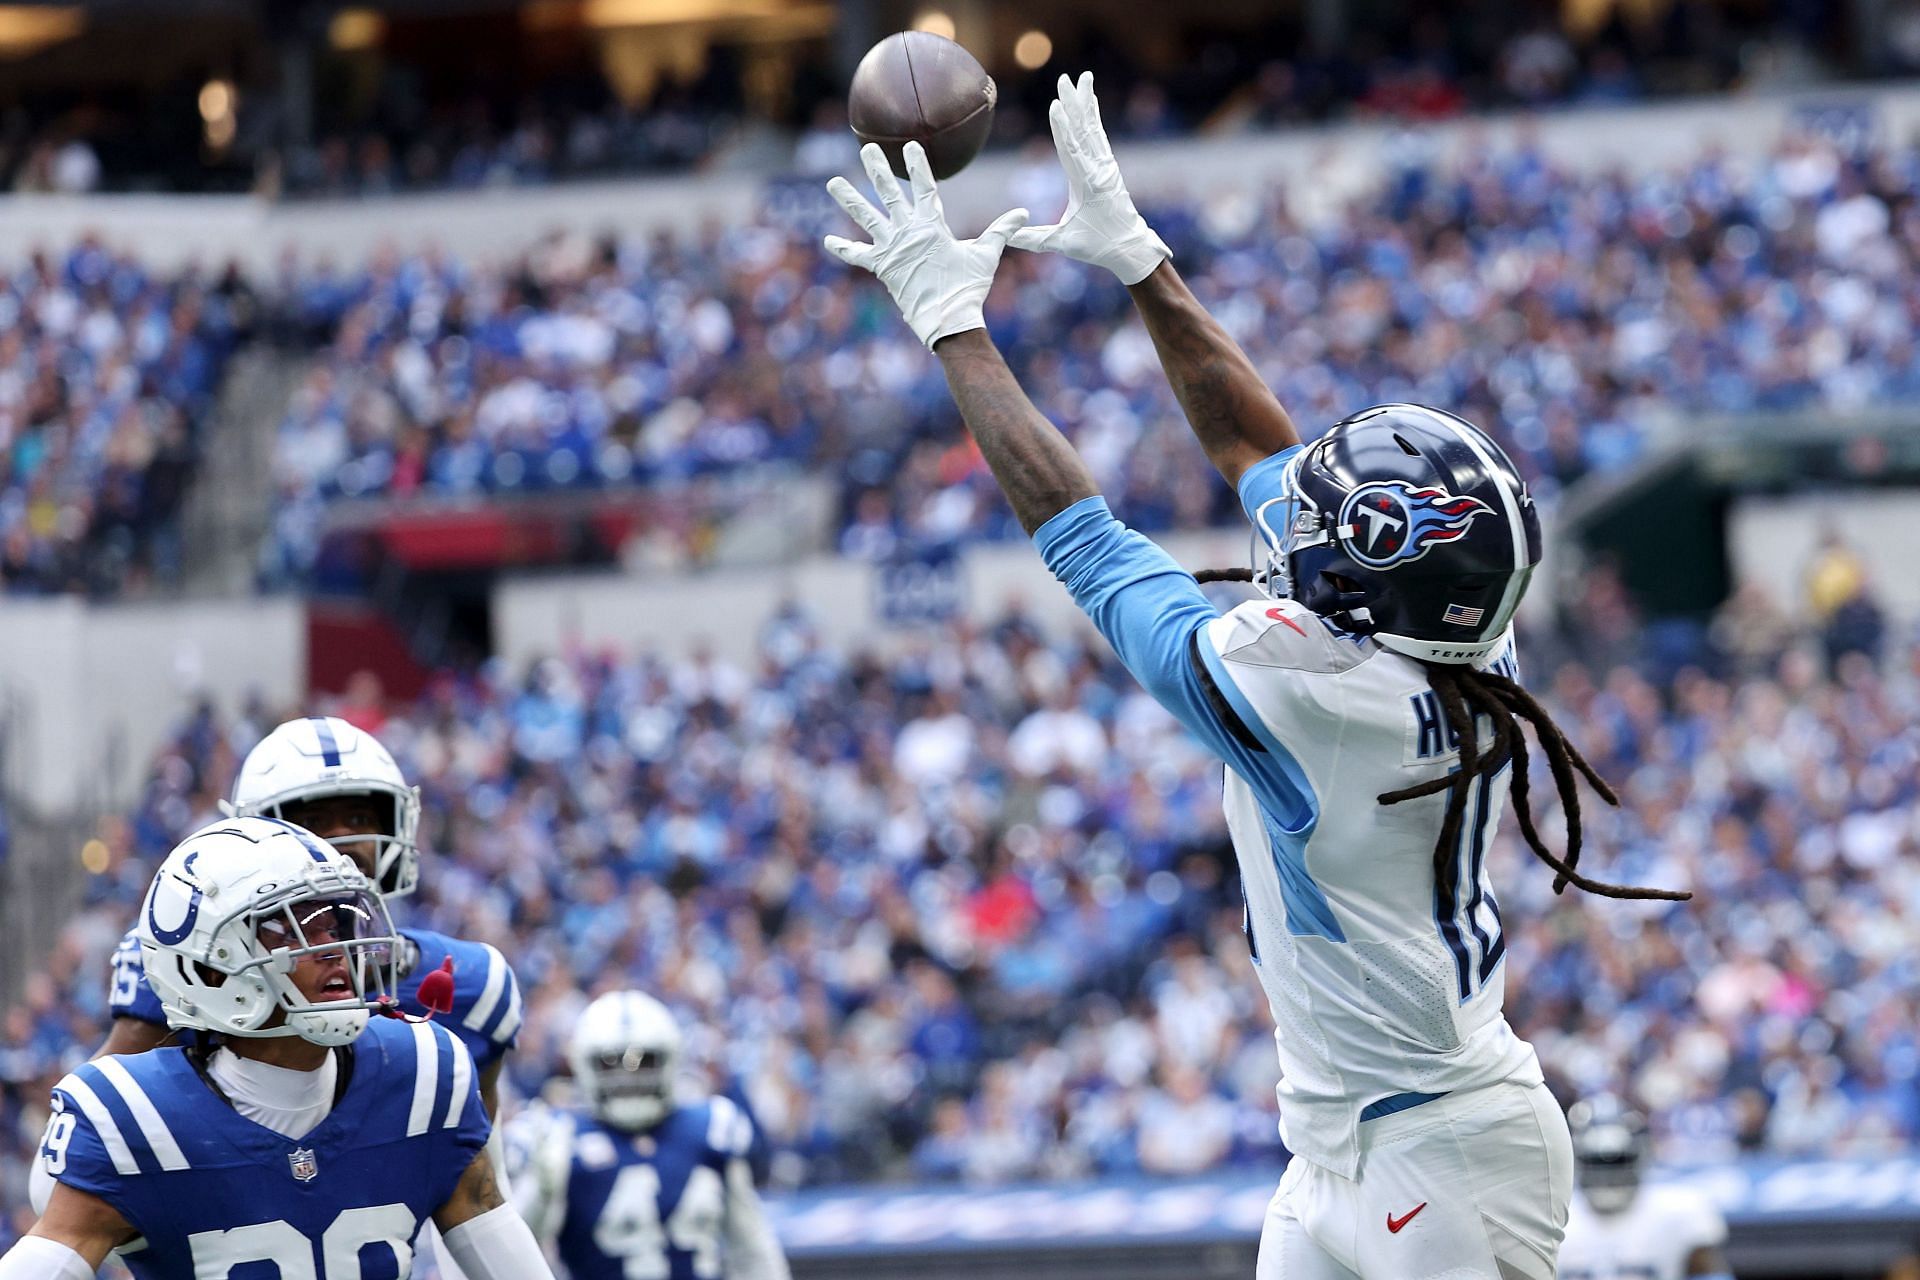 DeAndre Hopkins during Tennessee Titans vs. Indianapolis Colts